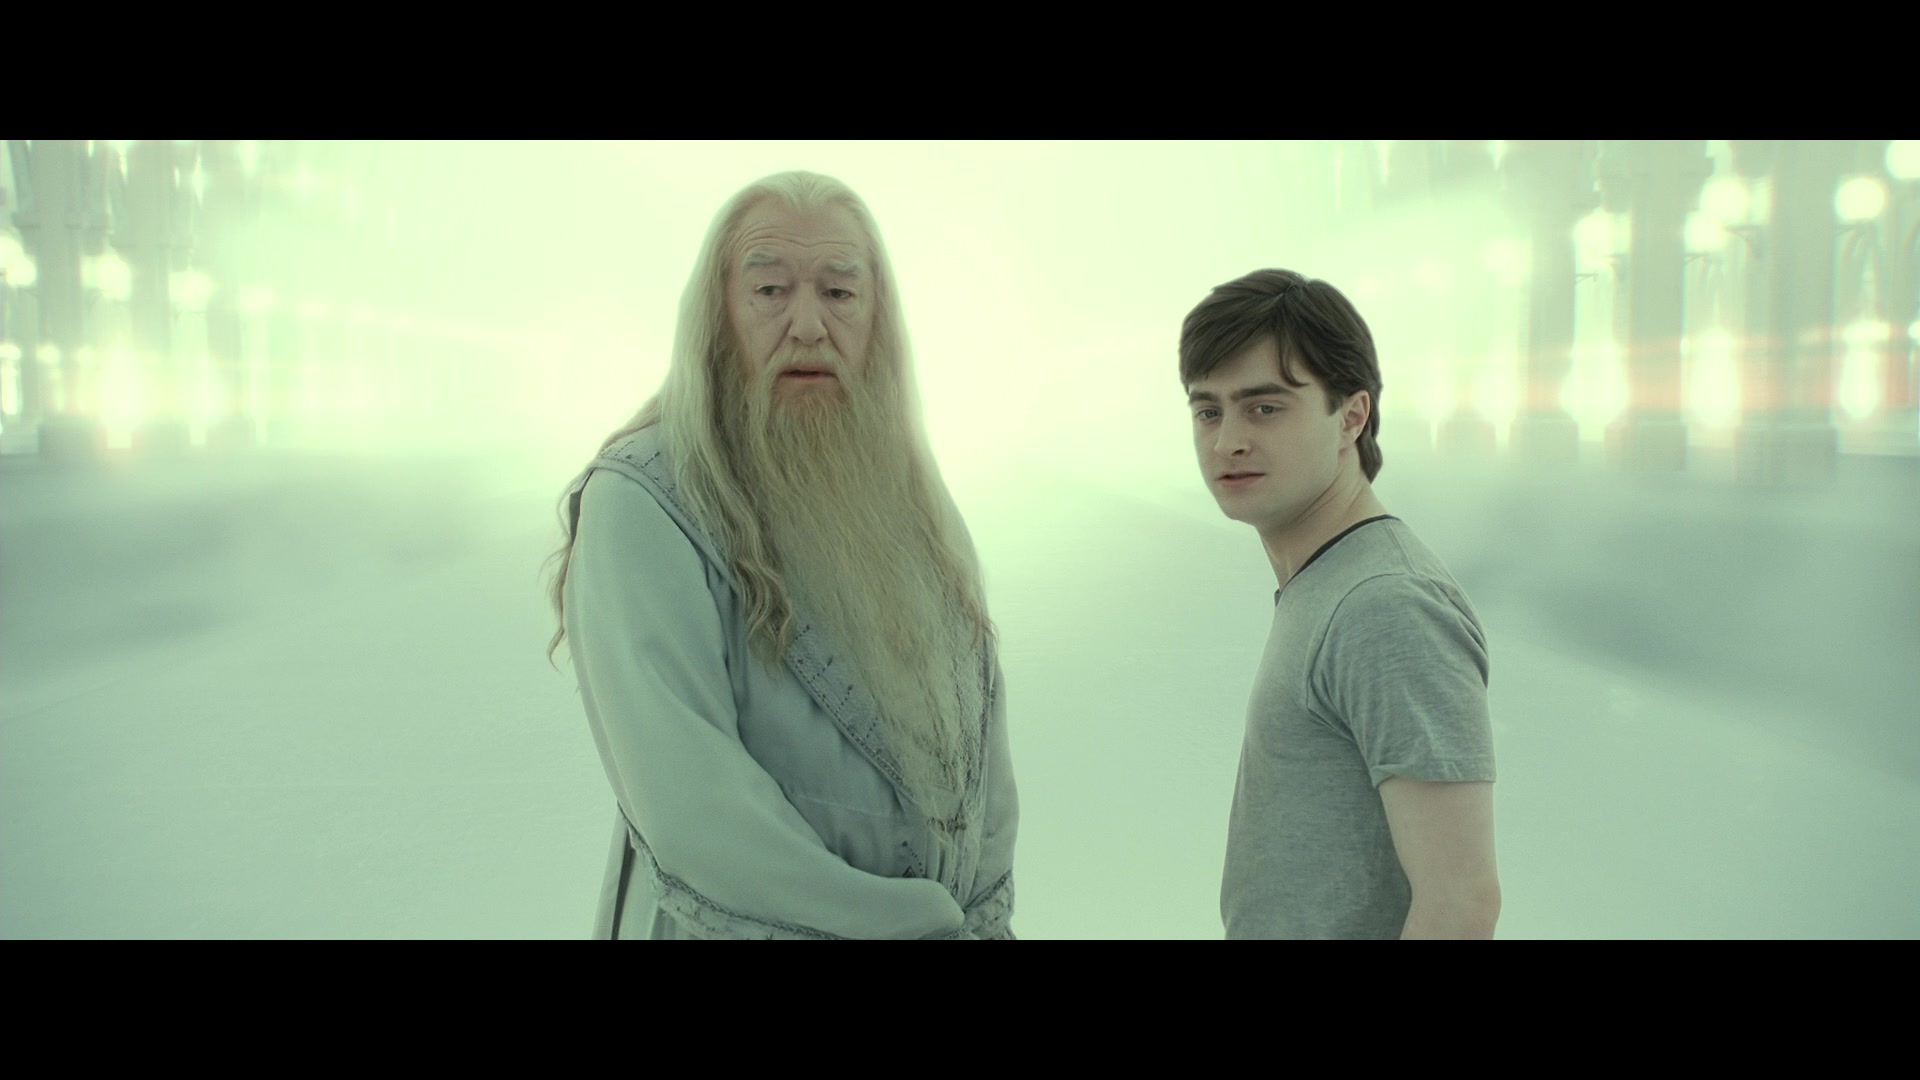 Albus Dumbledore (Michael Gambon) and Harry Potter (Daniel Radcliffe) look upon Lord Voldemort's (Ralph Fiennes) true form in Harry Potter and the Deathly Hallows - Part 2 (2010), Warner Bros. Pictures